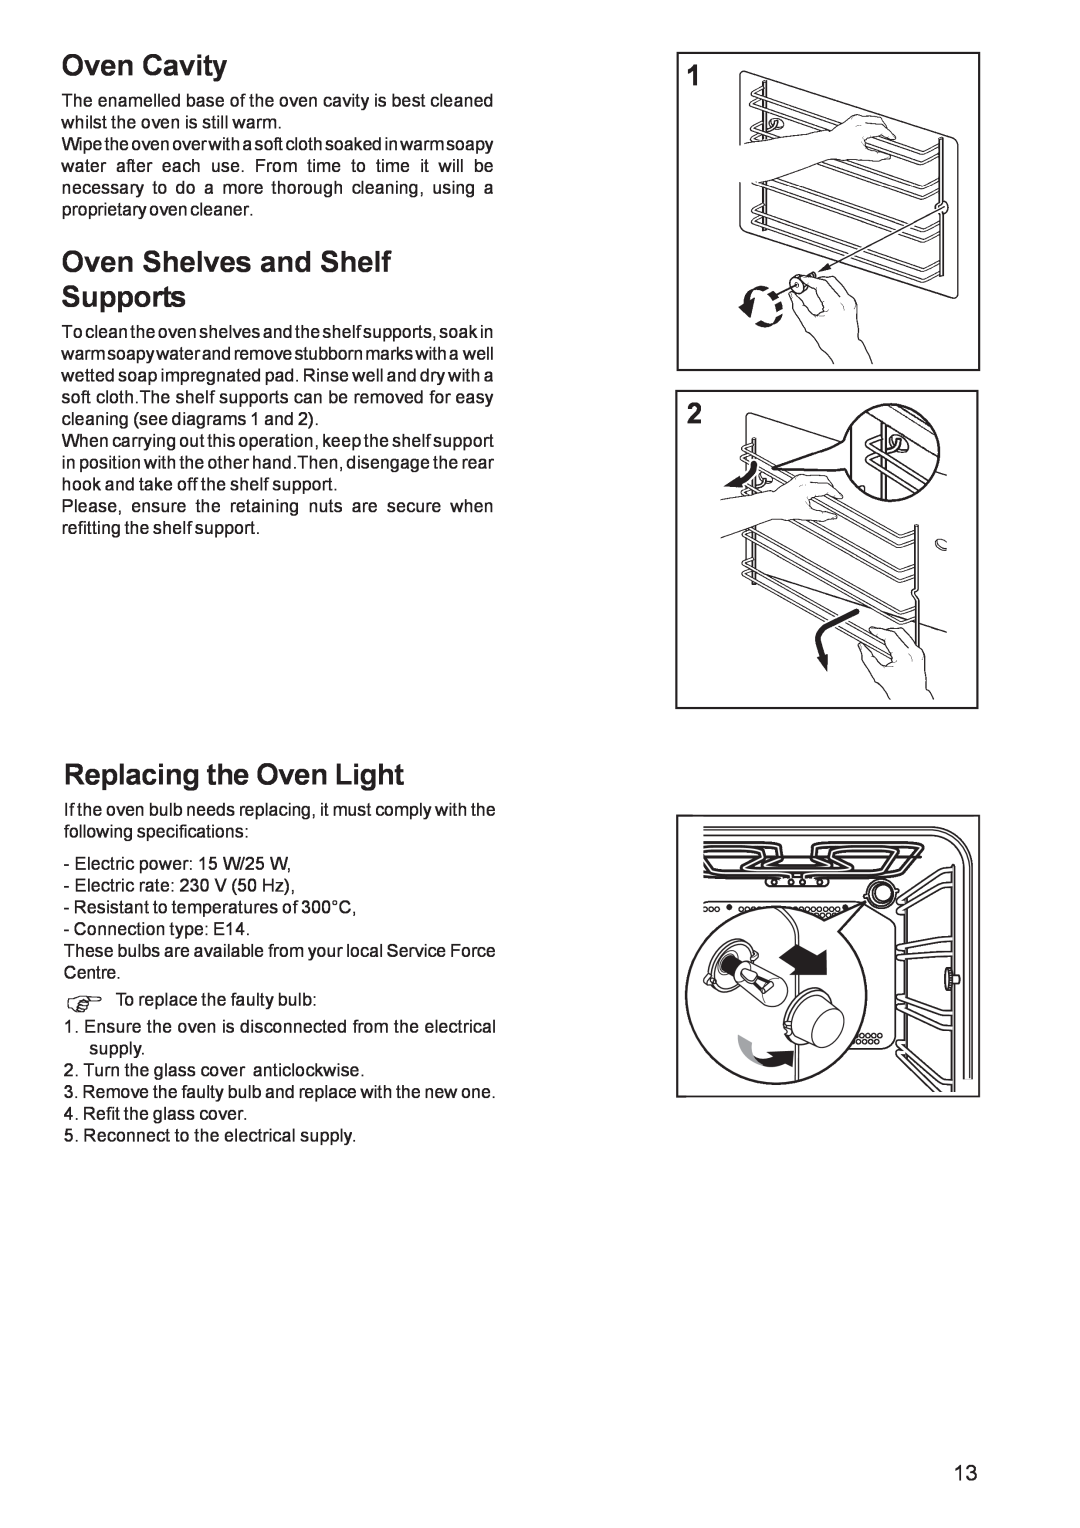 Electrolux EOB 5700 manual Oven Cavity, Oven Shelves and Shelf Supports, Replacing the Oven Light 